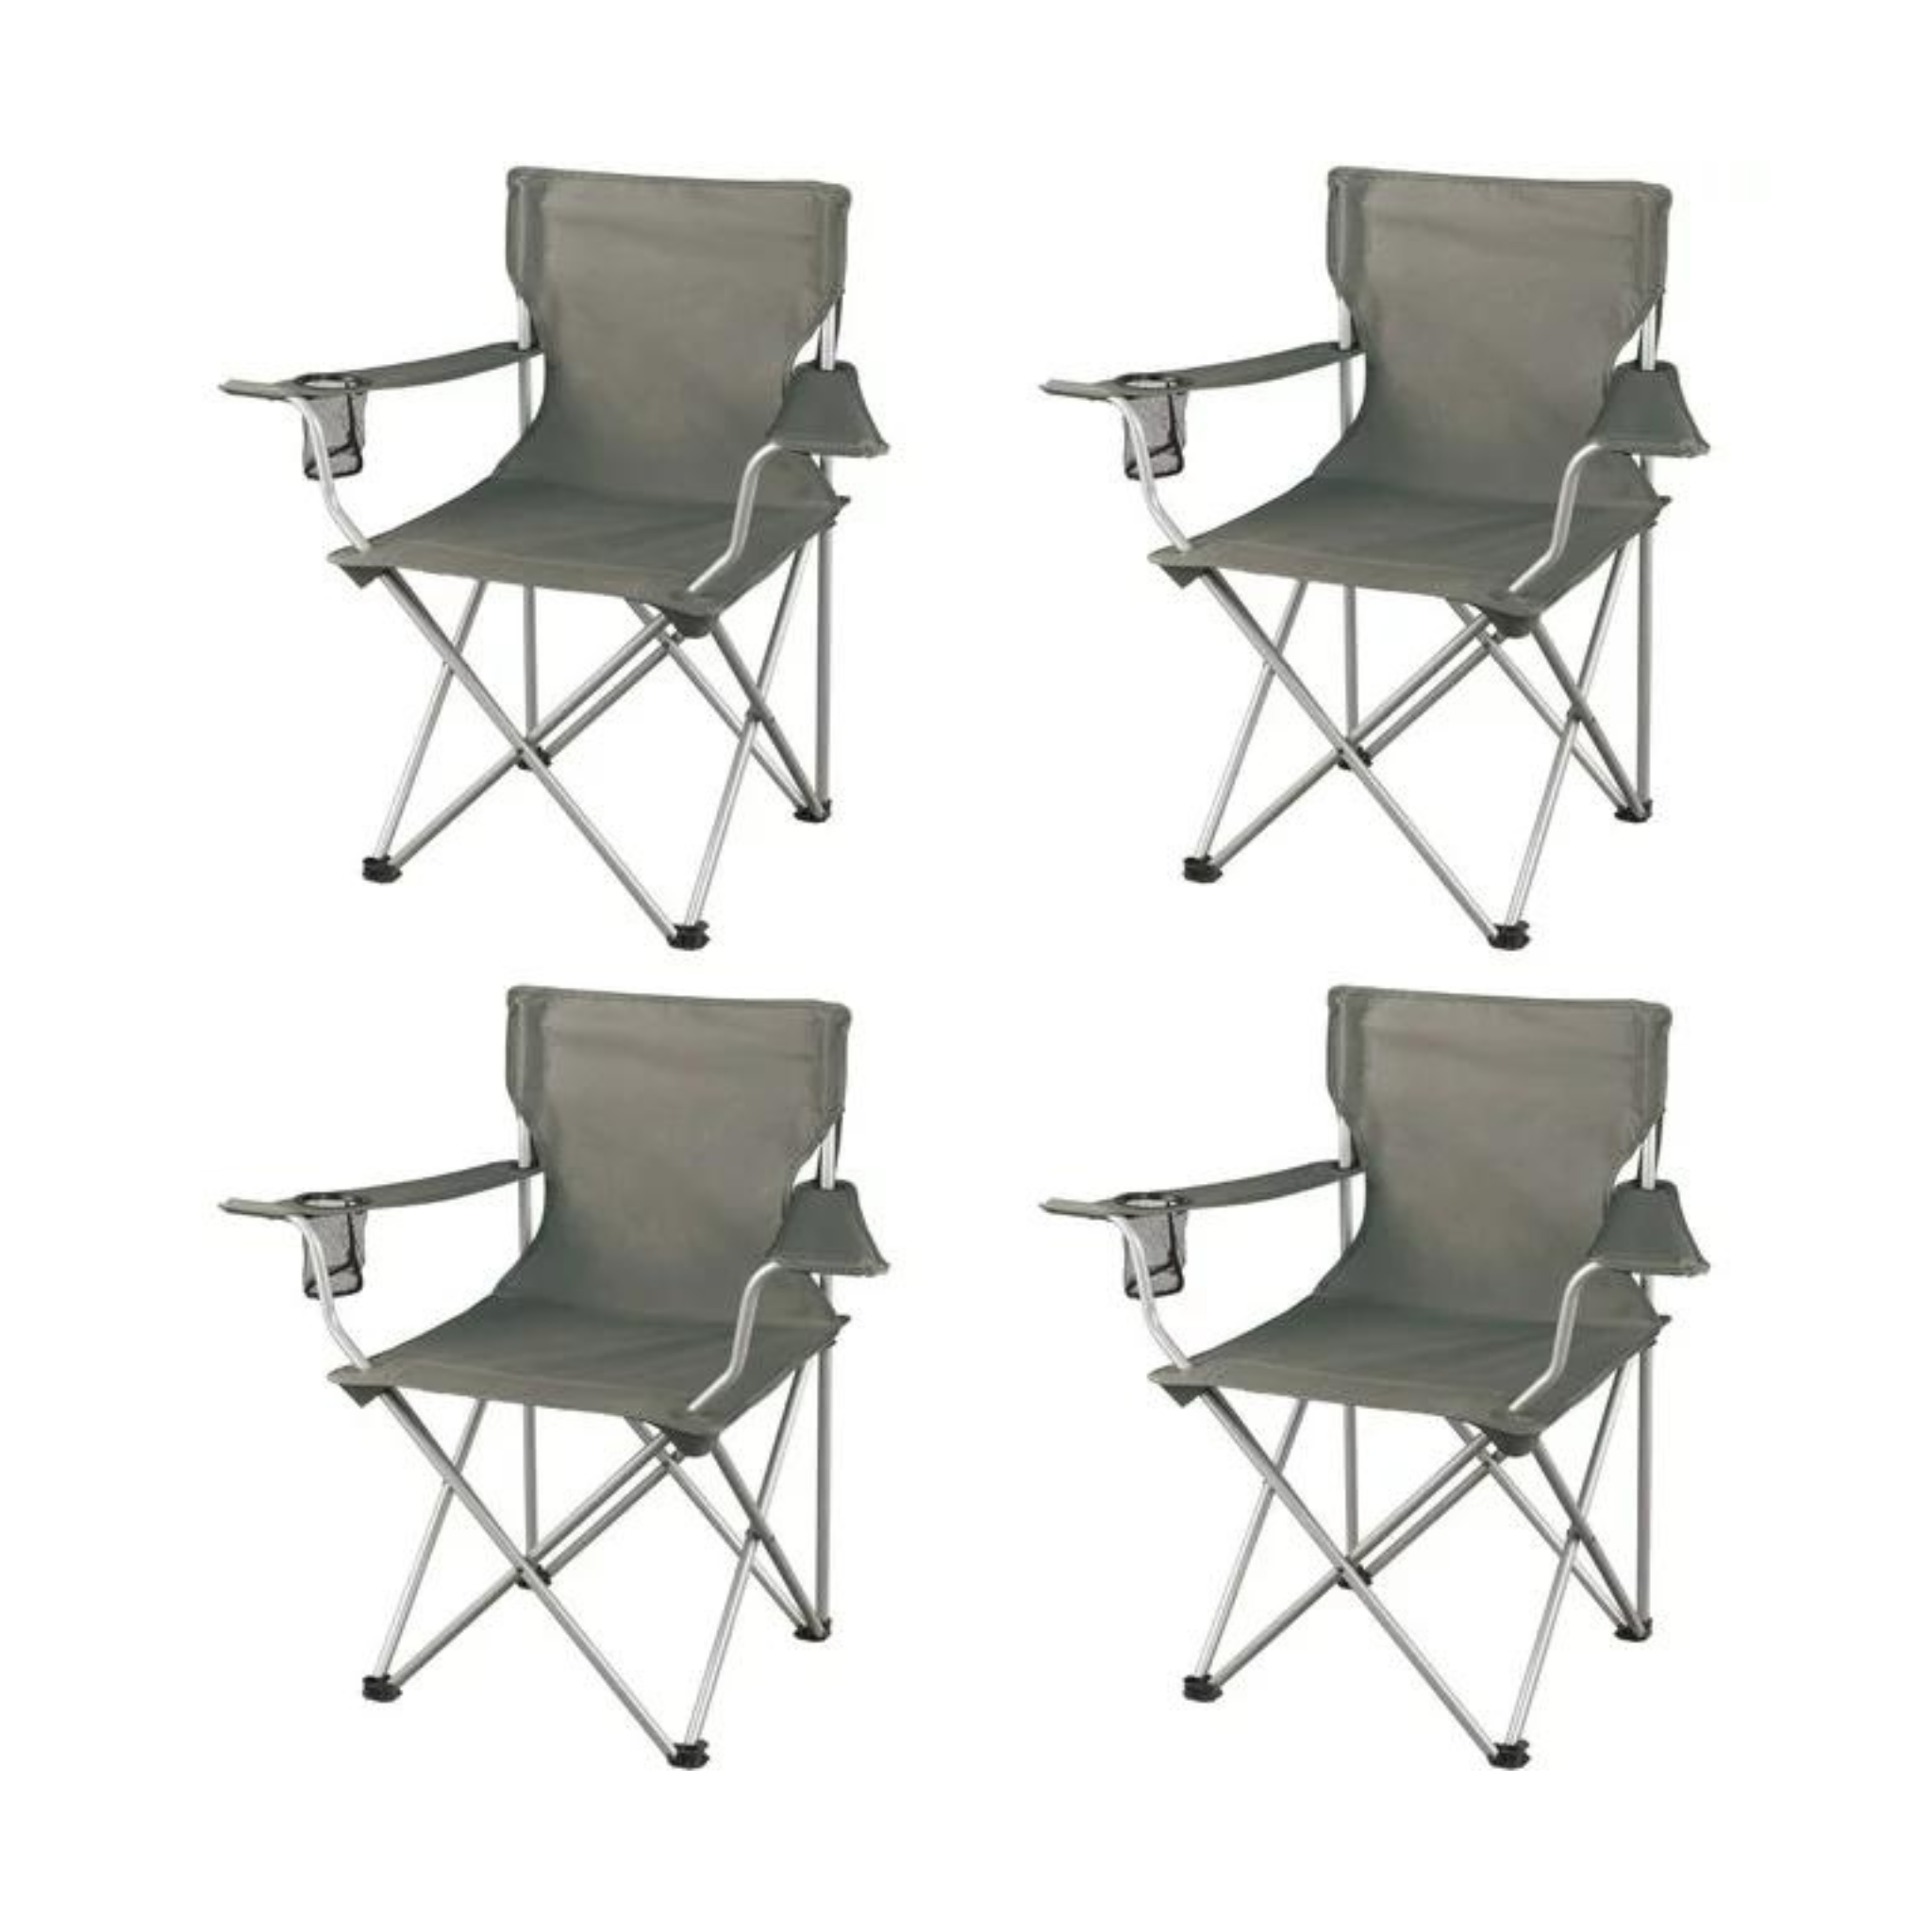 Set of 4 Ozark Trail Classic Folding Camp Chairs with Mesh Cup Holder